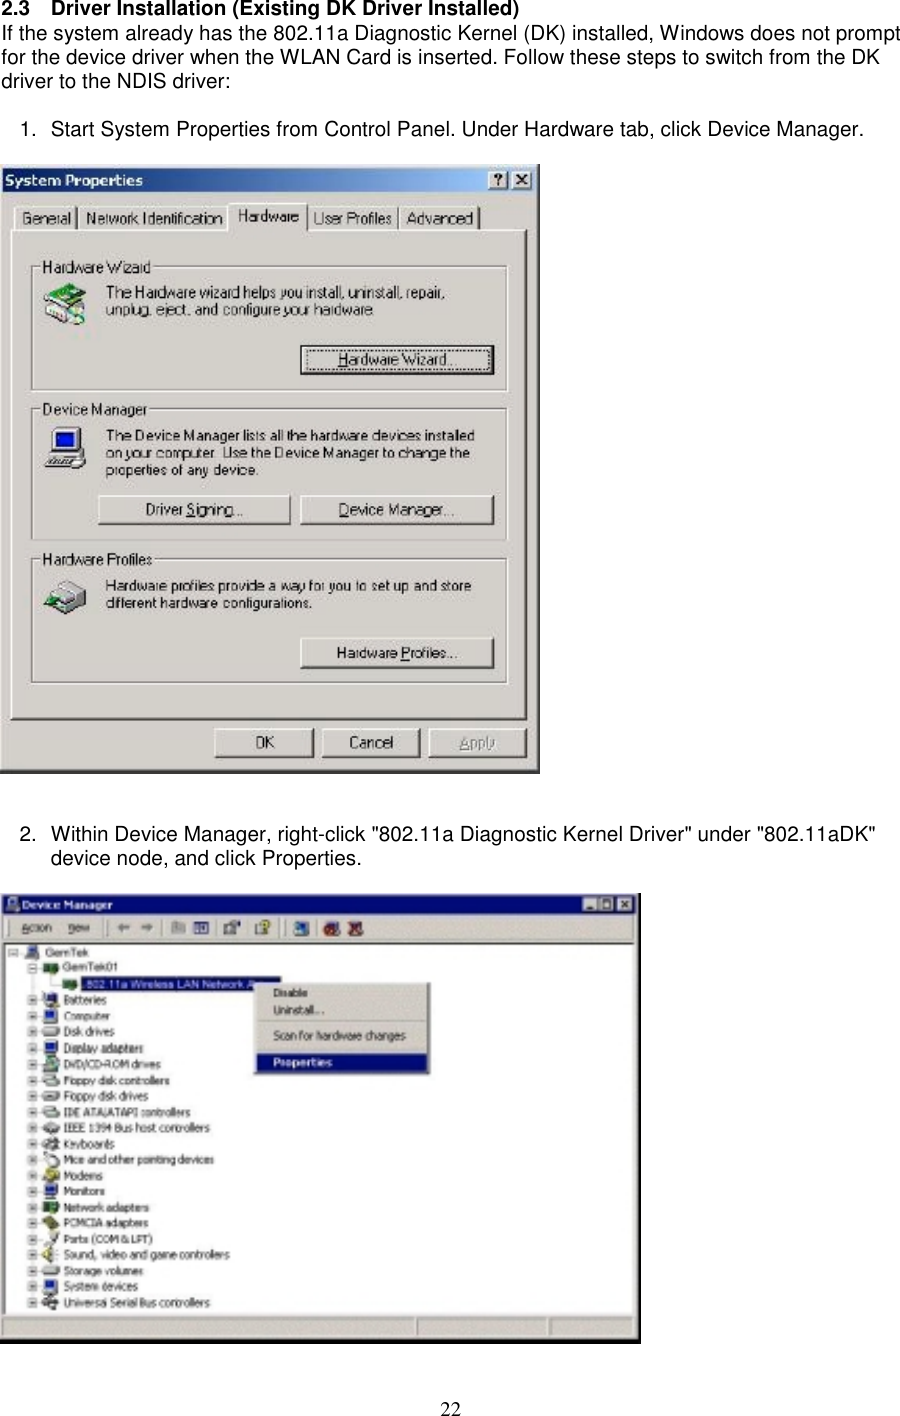 222.3 Driver Installation (Existing DK Driver Installed)If the system already has the 802.11a Diagnostic Kernel (DK) installed, Windows does not promptfor the device driver when the WLAN Card is inserted. Follow these steps to switch from the DKdriver to the NDIS driver:1.  Start System Properties from Control Panel. Under Hardware tab, click Device Manager.2.  Within Device Manager, right-click &quot;802.11a Diagnostic Kernel Driver&quot; under &quot;802.11aDK&quot;device node, and click Properties.